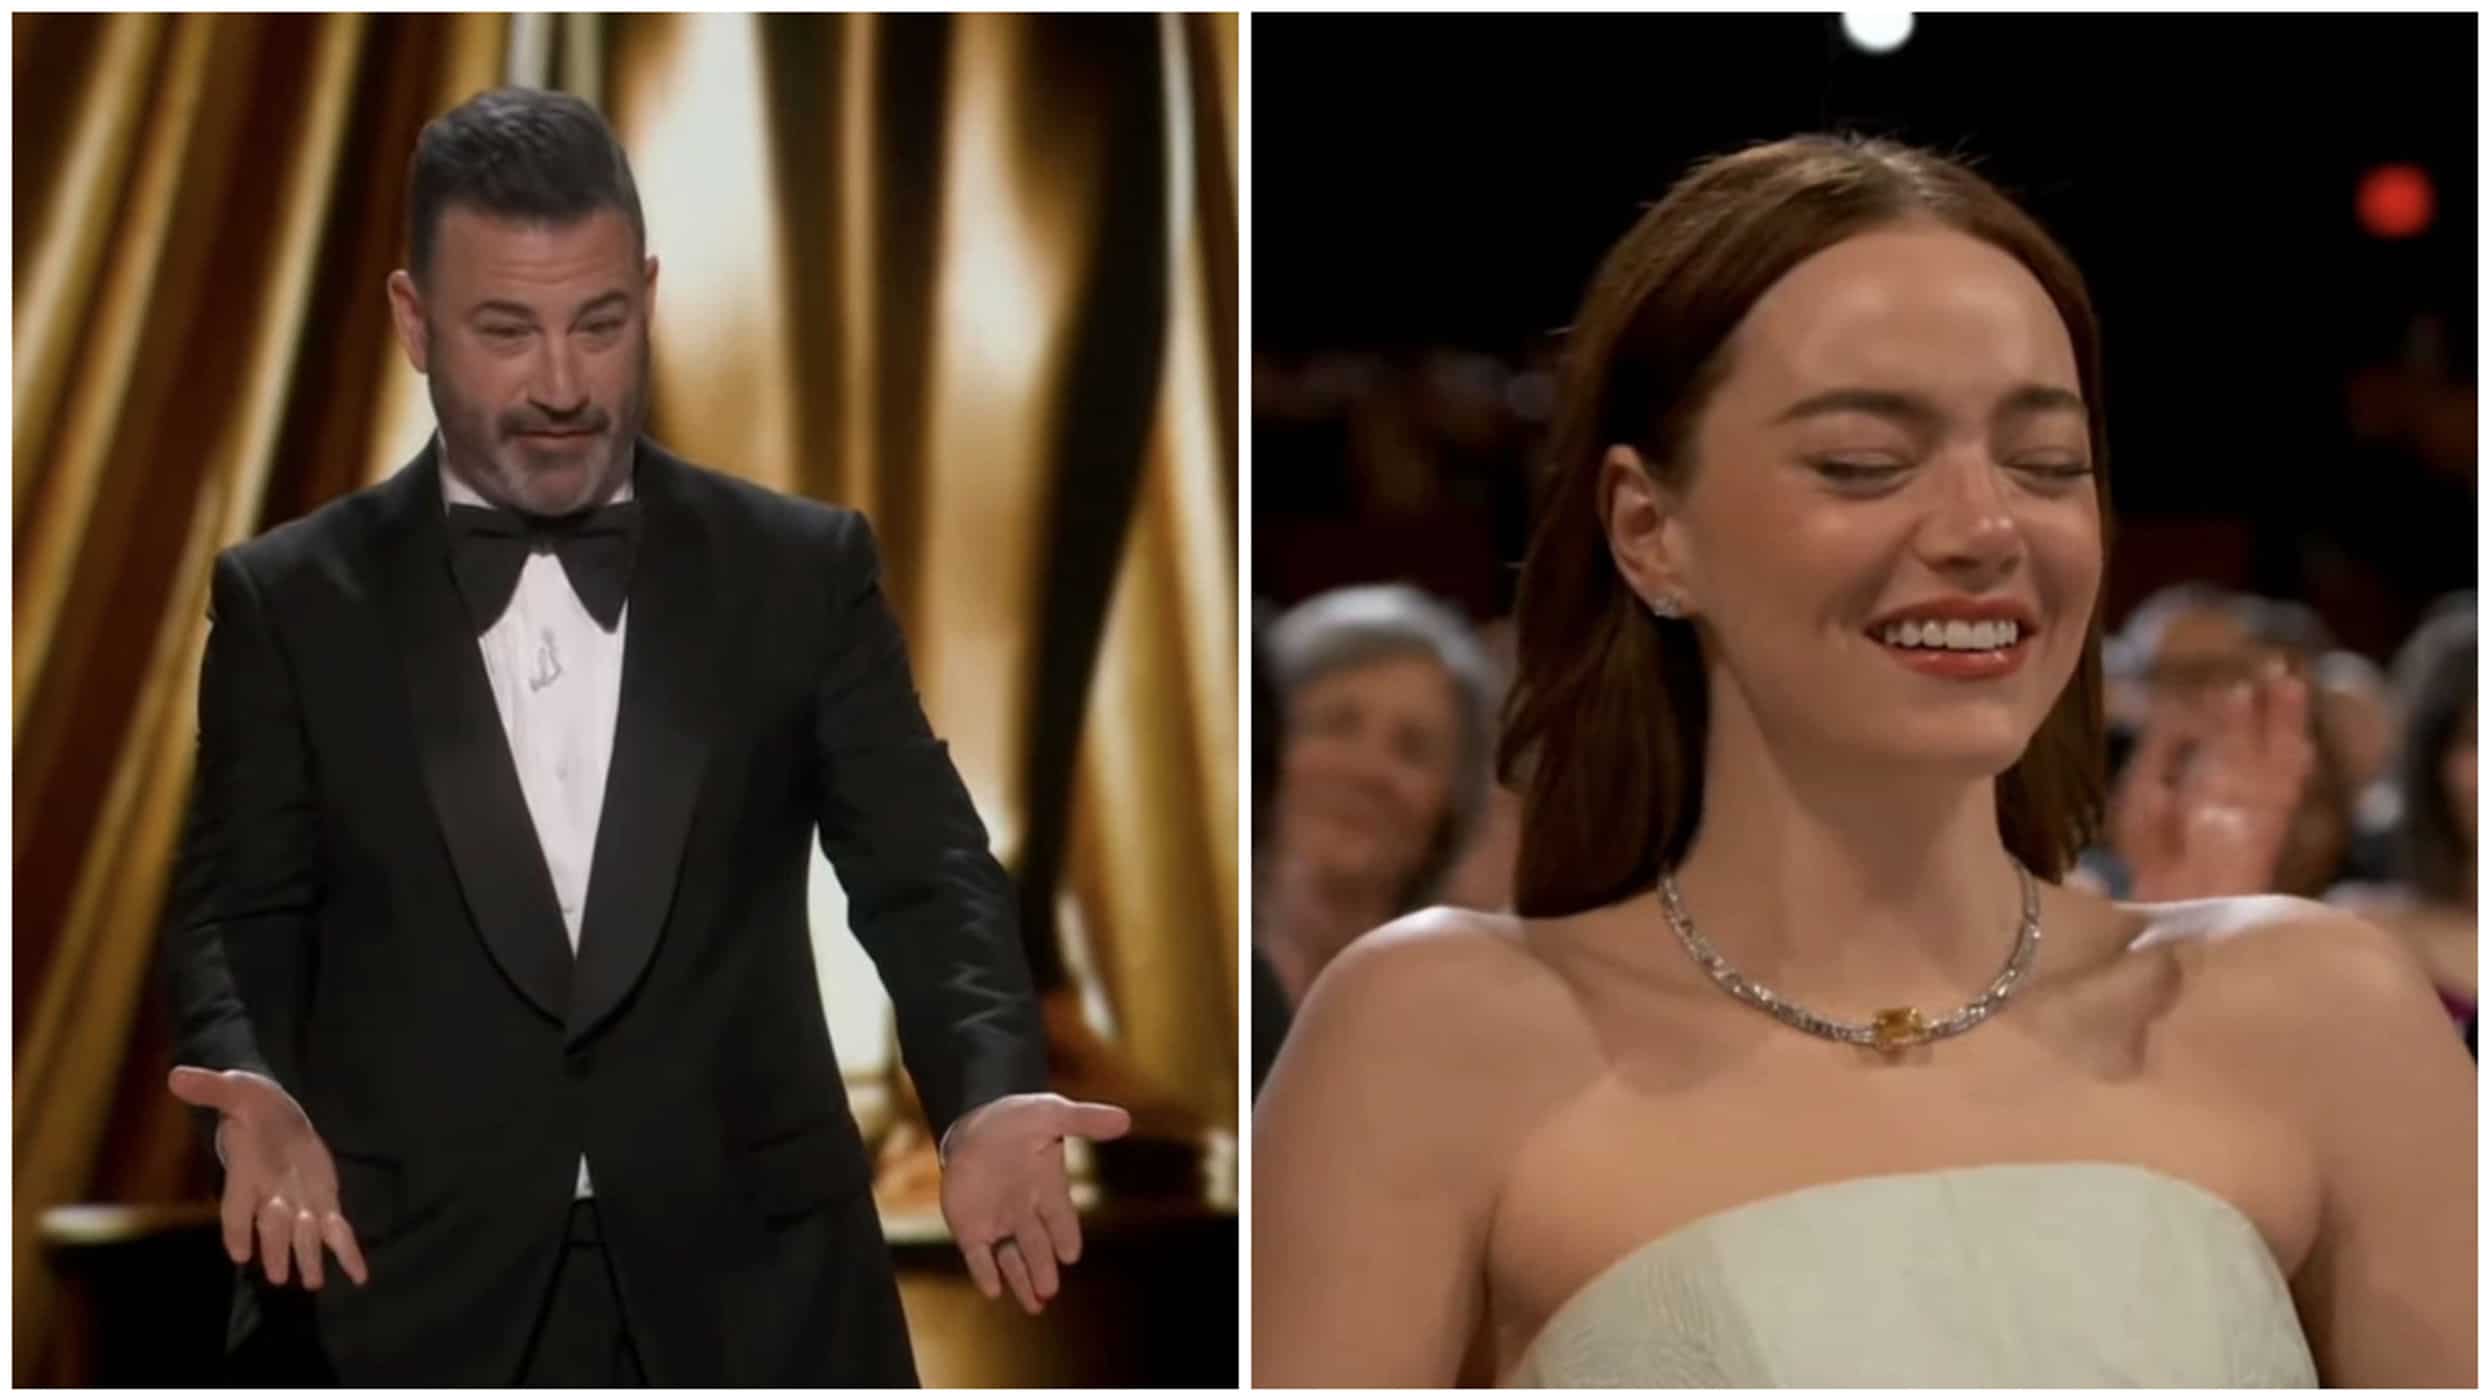 https://www.mobilemasala.com/film-gossip/Oscars-2024---Was-Emma-Stone-upset-about-Jimmy-Kimmels-joke-on-Poor-Things-Here-is-what-happened-i222677